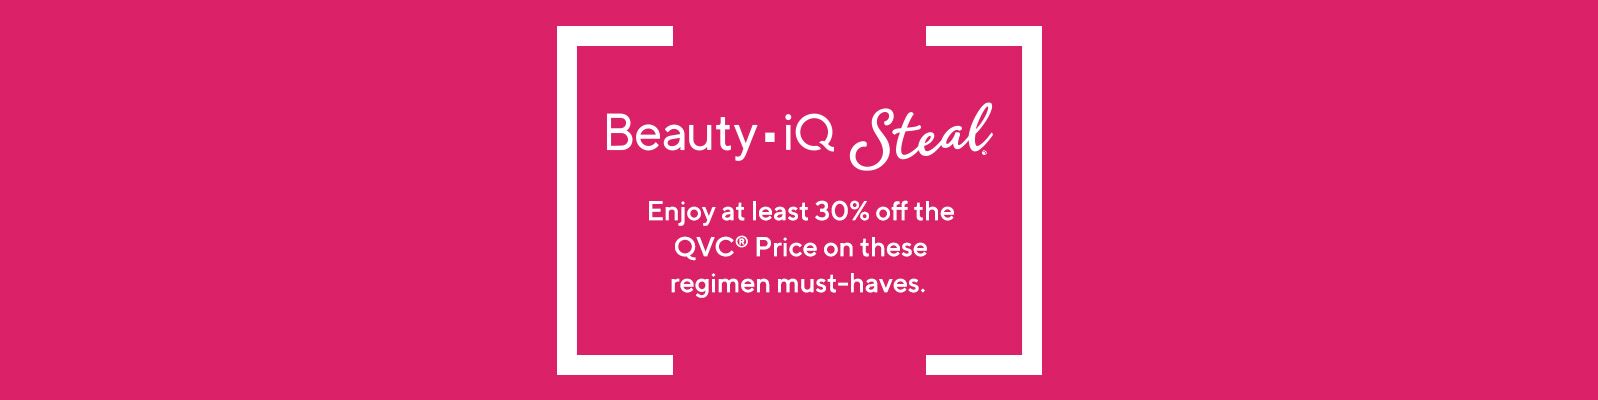 Beauty iQ Steal®  Enjoy at least 30% off the QVC® Price on these regimen must-haves for a limited time.